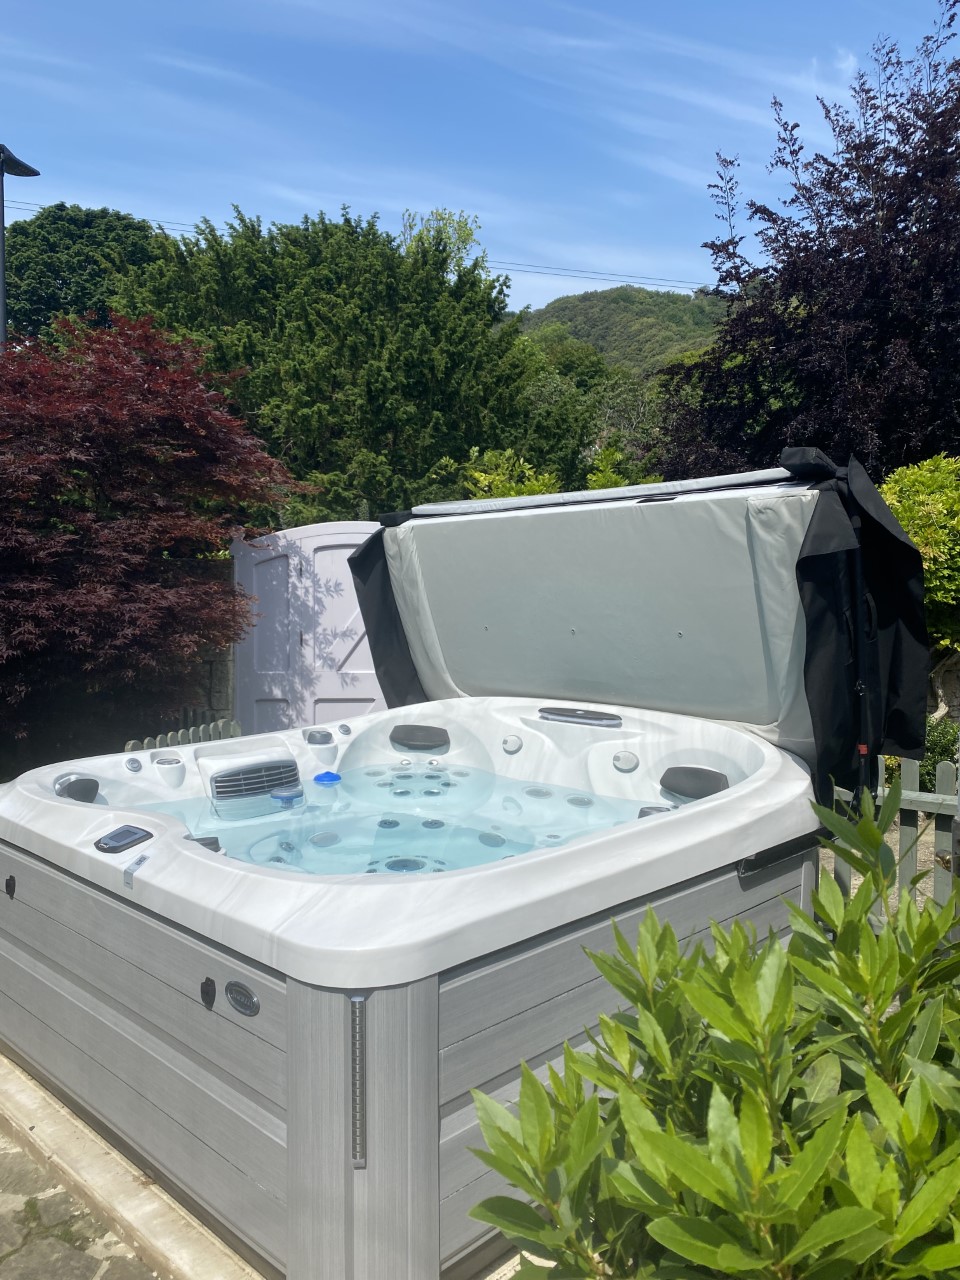 Jacuzzi hot tub holiday cottage located in Ventnor Isle of Wight 